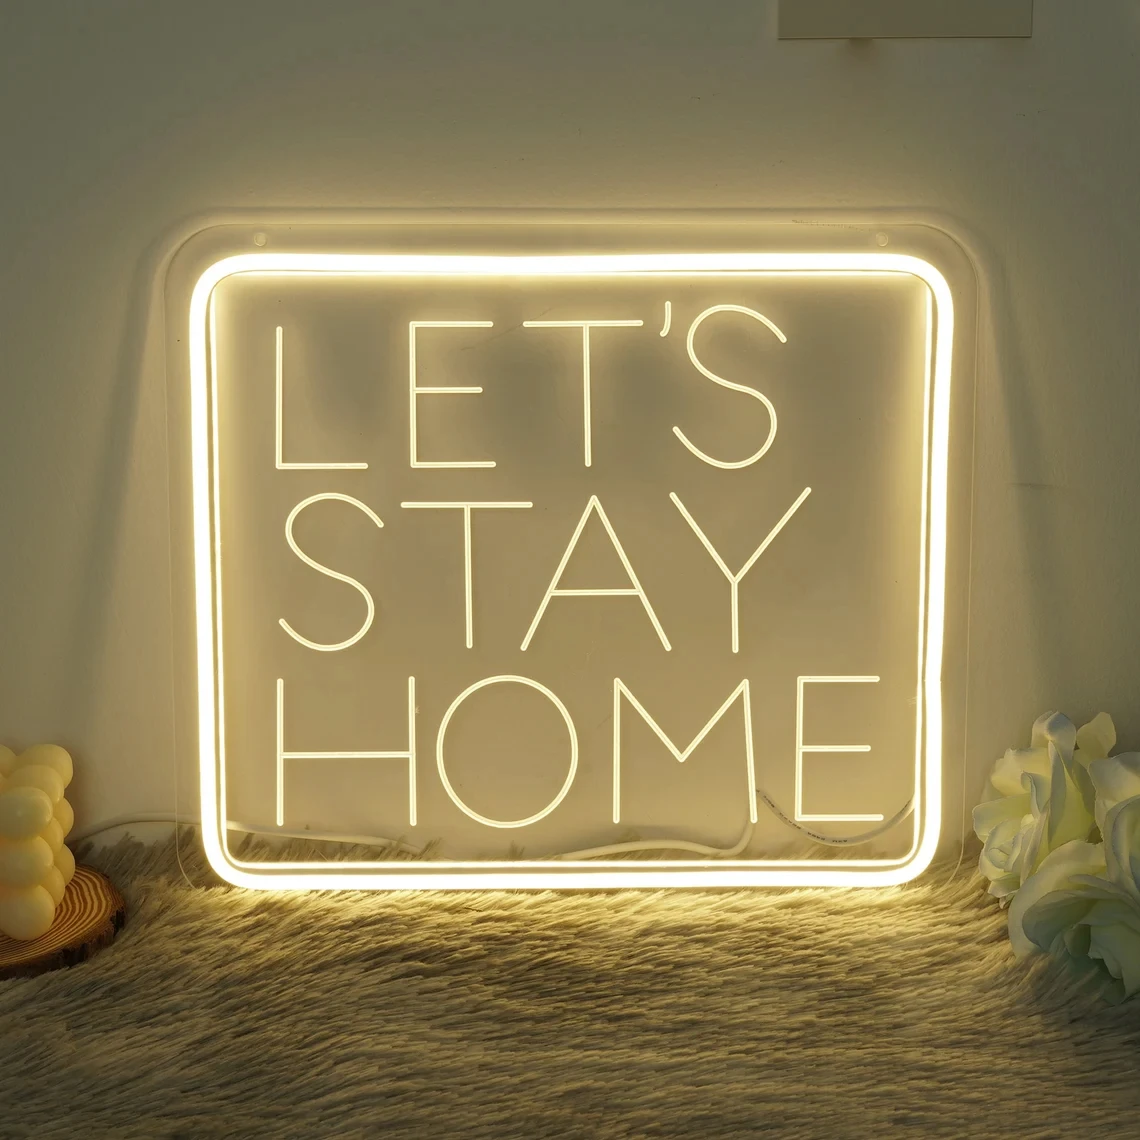 

Let's Stay Home Neon Sign LED 3D Engraving Neon Light Home Room Party Wall Decor Game Room Bedroom Living Room Decor Lamp Signs